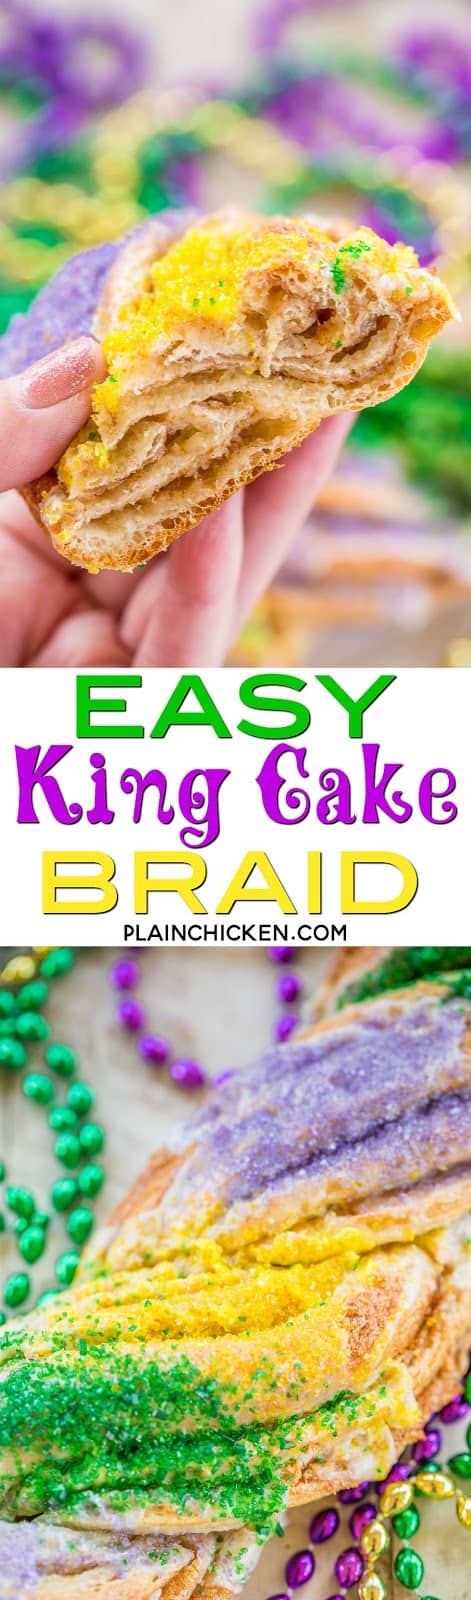 Easy King Cake Braid - perfect for Mardi Gras!!! Easy King Cake made with refrigerated french bread dough - stuffed with cream cheese, cinnamon and sugar. Topped with a quick powdered sugar and milk glaze and sprinkled with yellow, purple and green sugar. SO festive!!! Ready to eat in 30 minutes! Great for breakfast or dessert. I took this to a party and it was gone in a flash!!! YUM! #kingcake #mardigras 